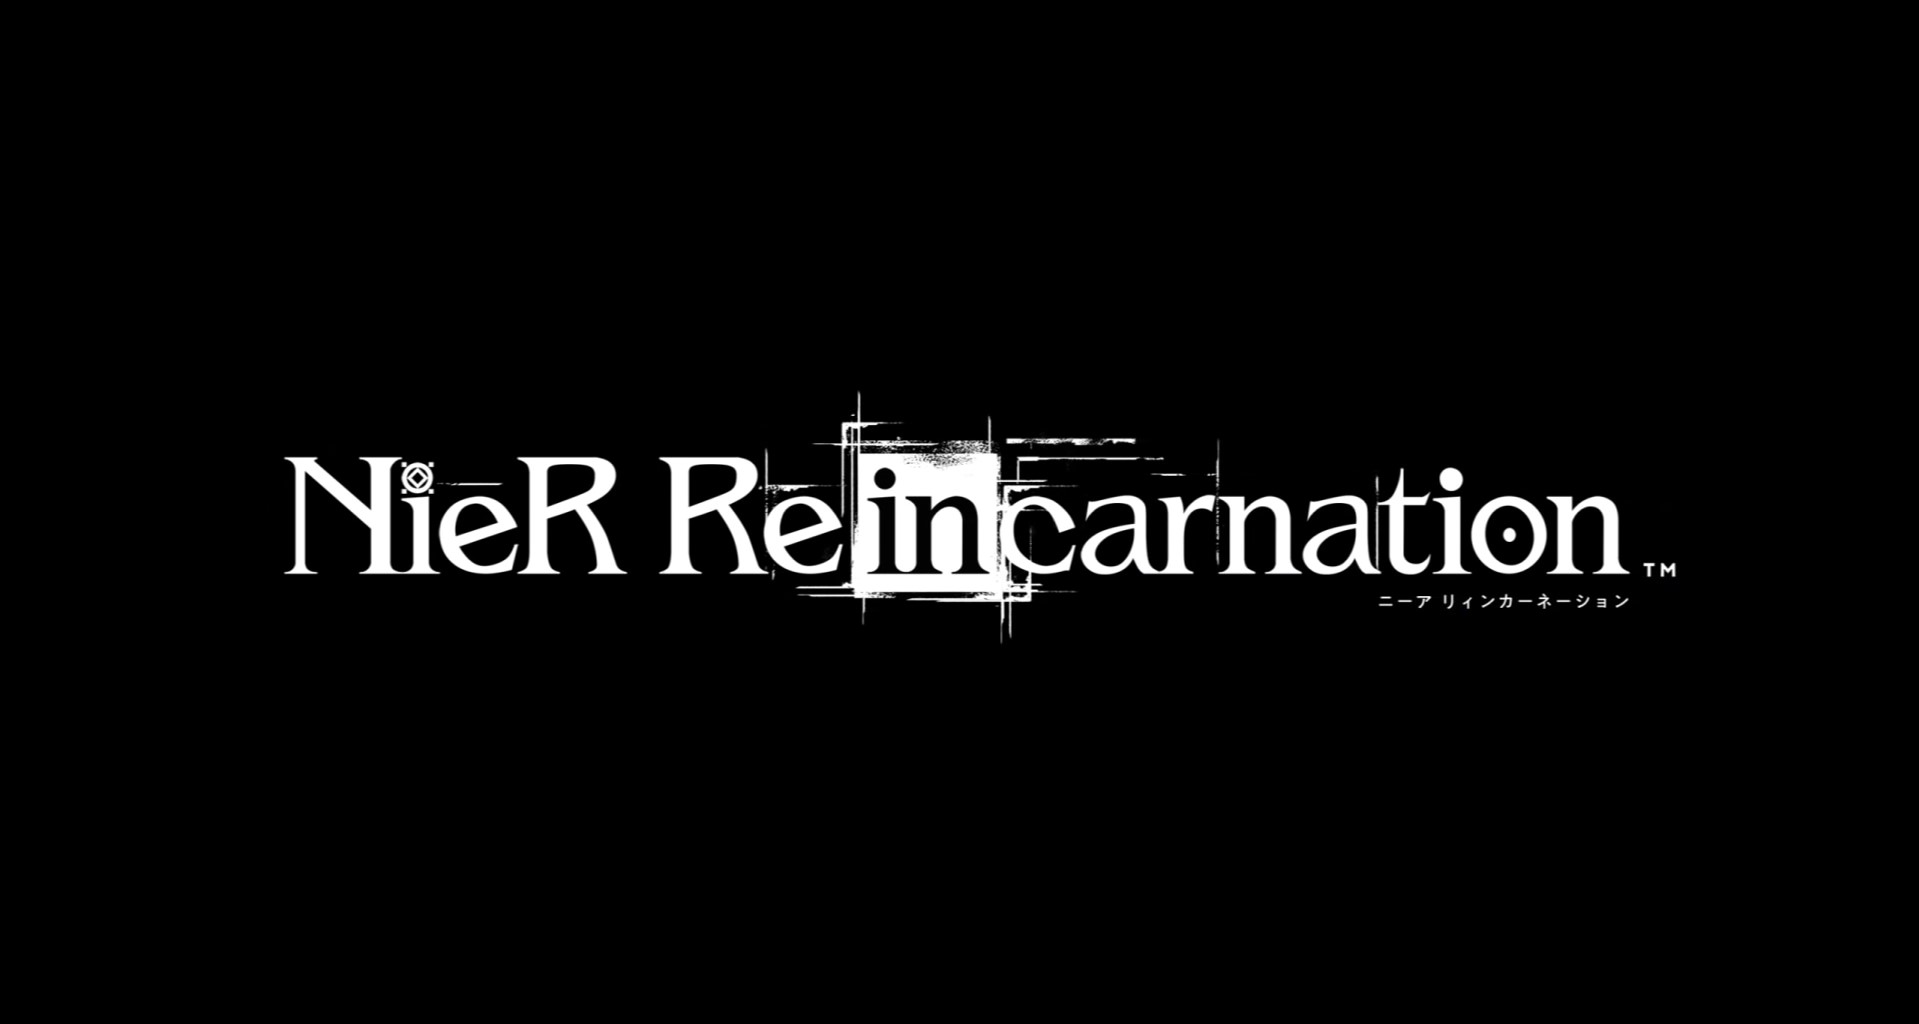 Nier Re[in]carnation logo feature image